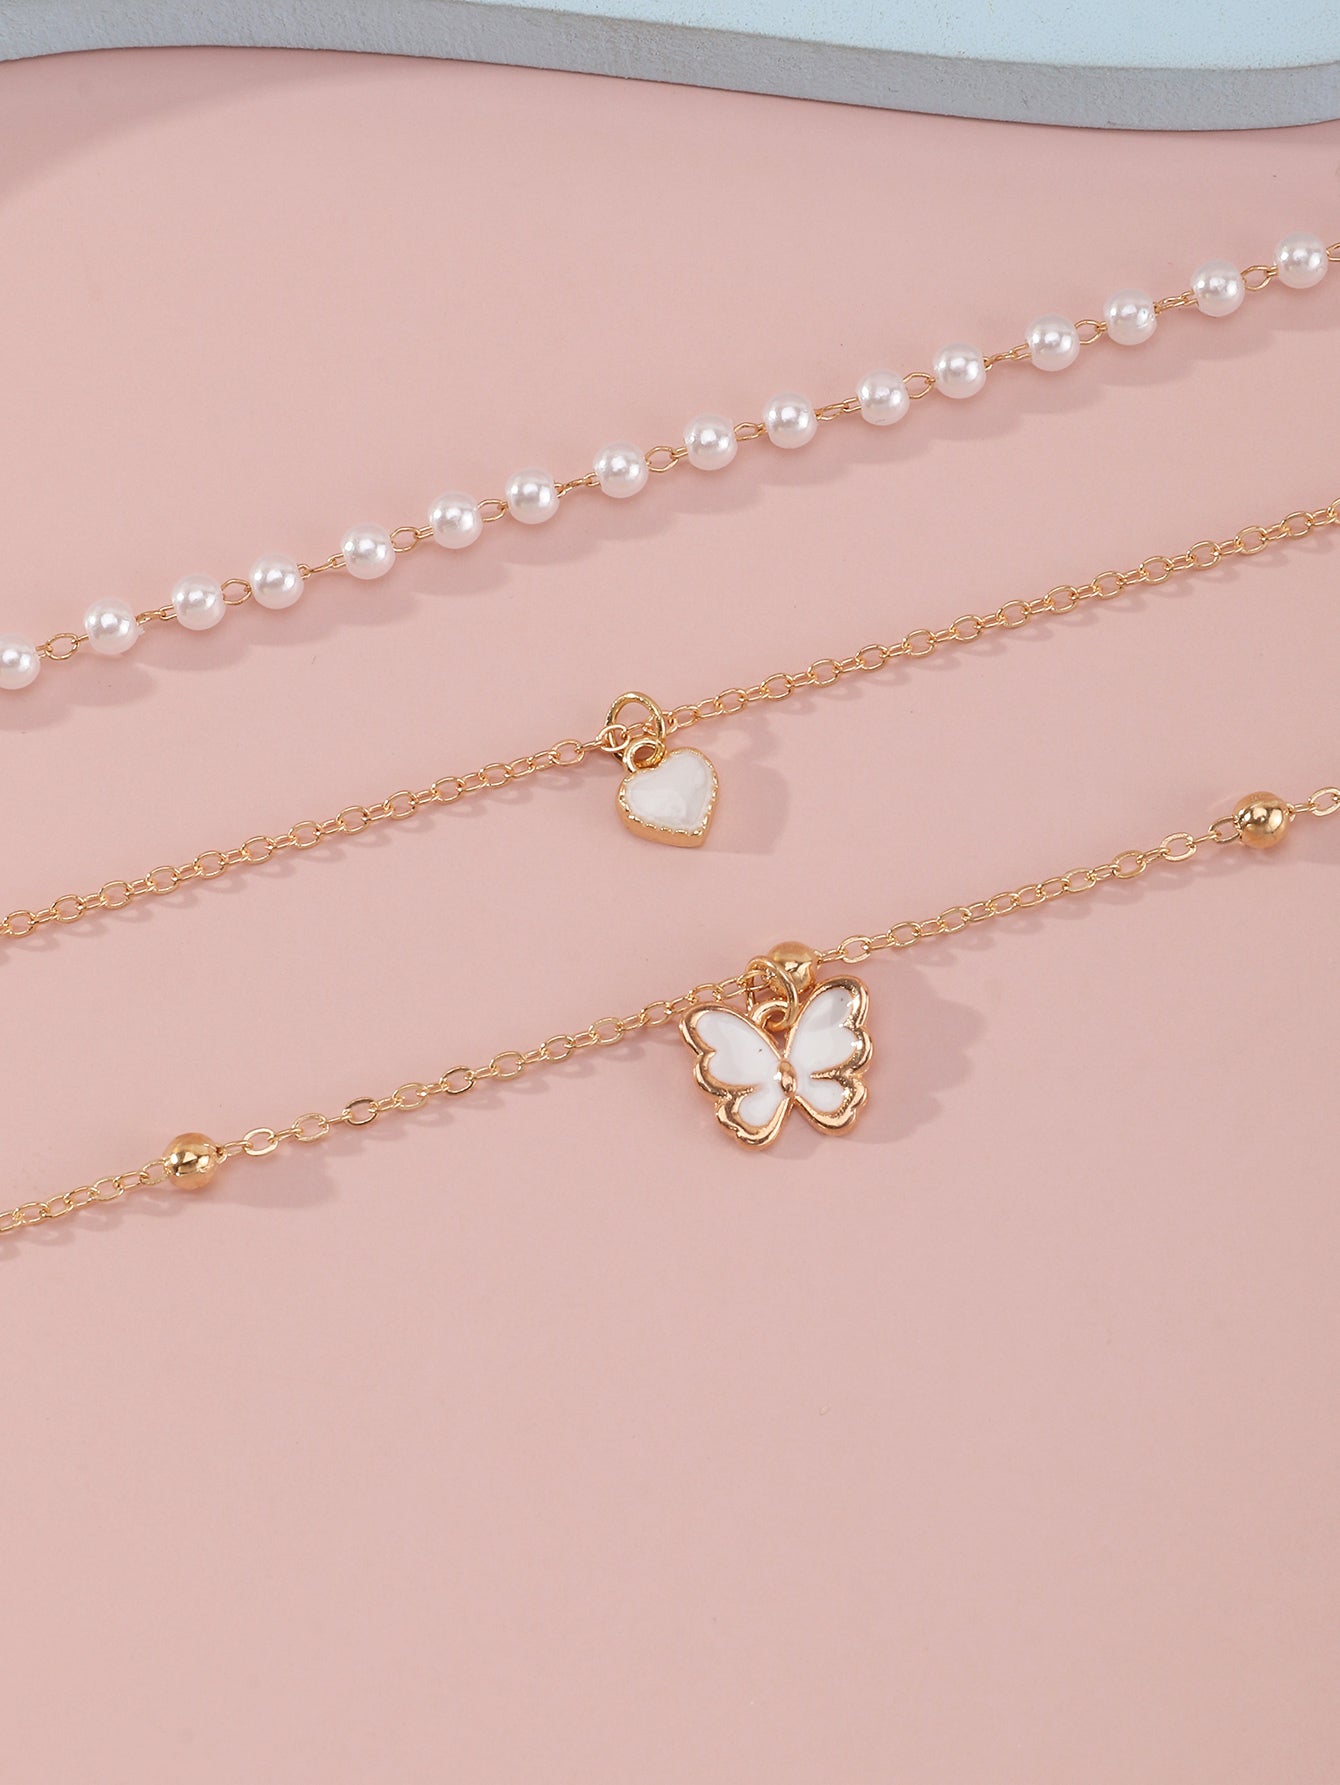 Cute Heart Shape Alloy Pearl Girl's Necklace 3 Pieces